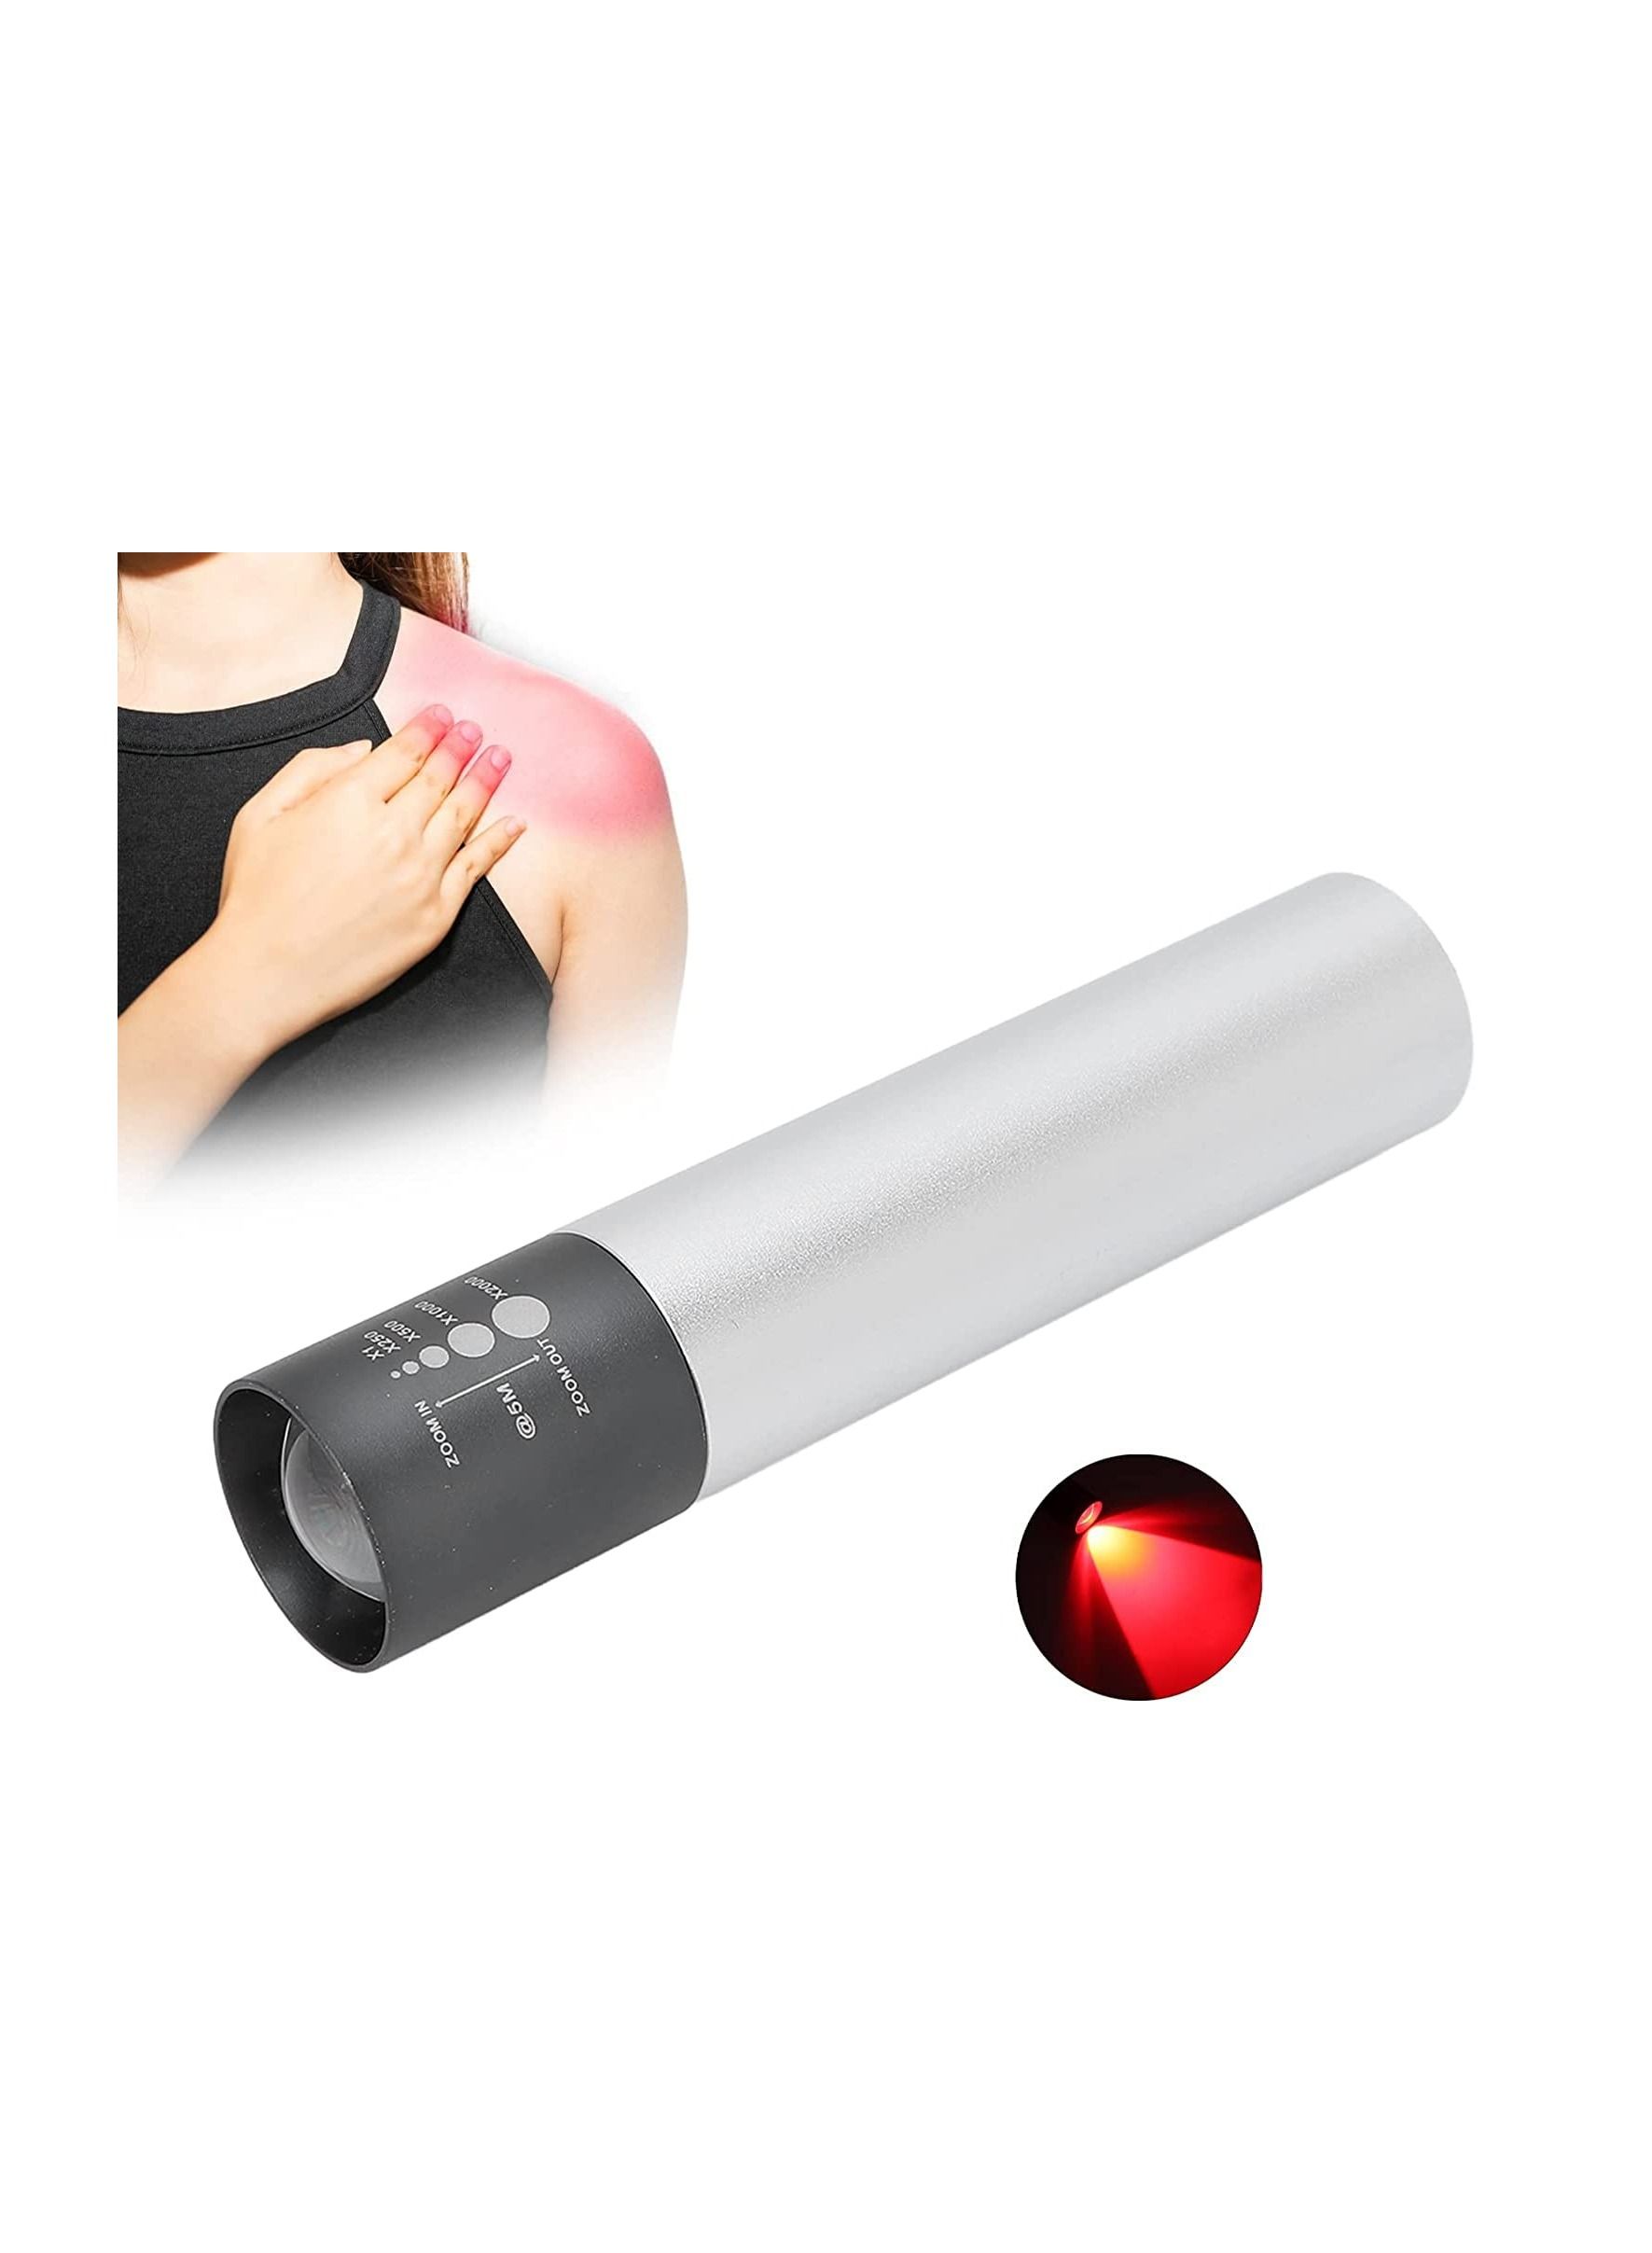 Portable Infrared Therapy Device, Retractable Infrared Laser Therapy for Joint and Muscle Pain Relief Anti-inflammatory on Knee, Shoulder, Back, Hands, Feet, Muscle 